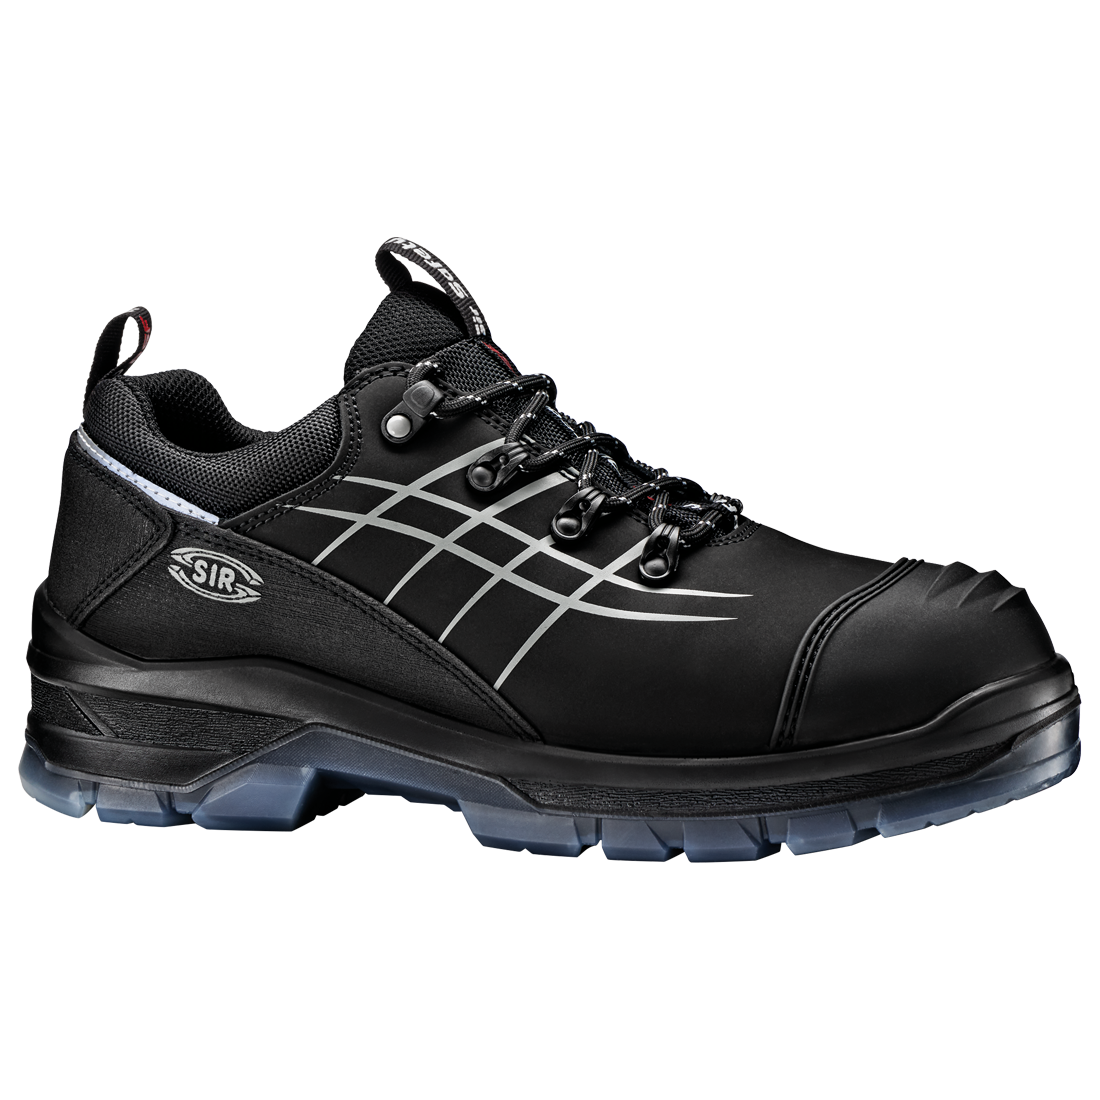 REX | Sir BSF NEW OVERCAP System SHOE Safety